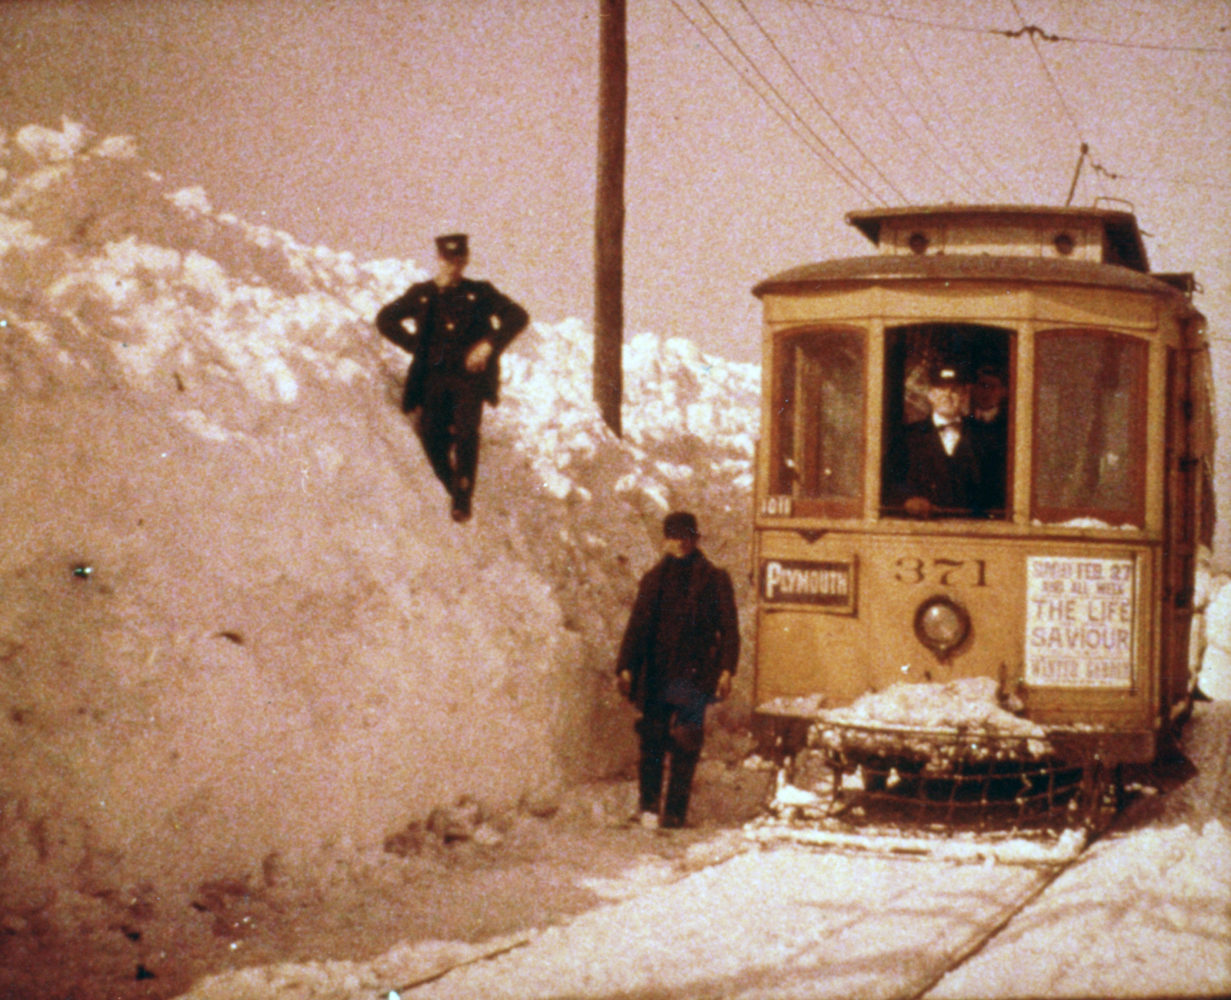 Plymouth Avenue street car - photo from City of Rochester